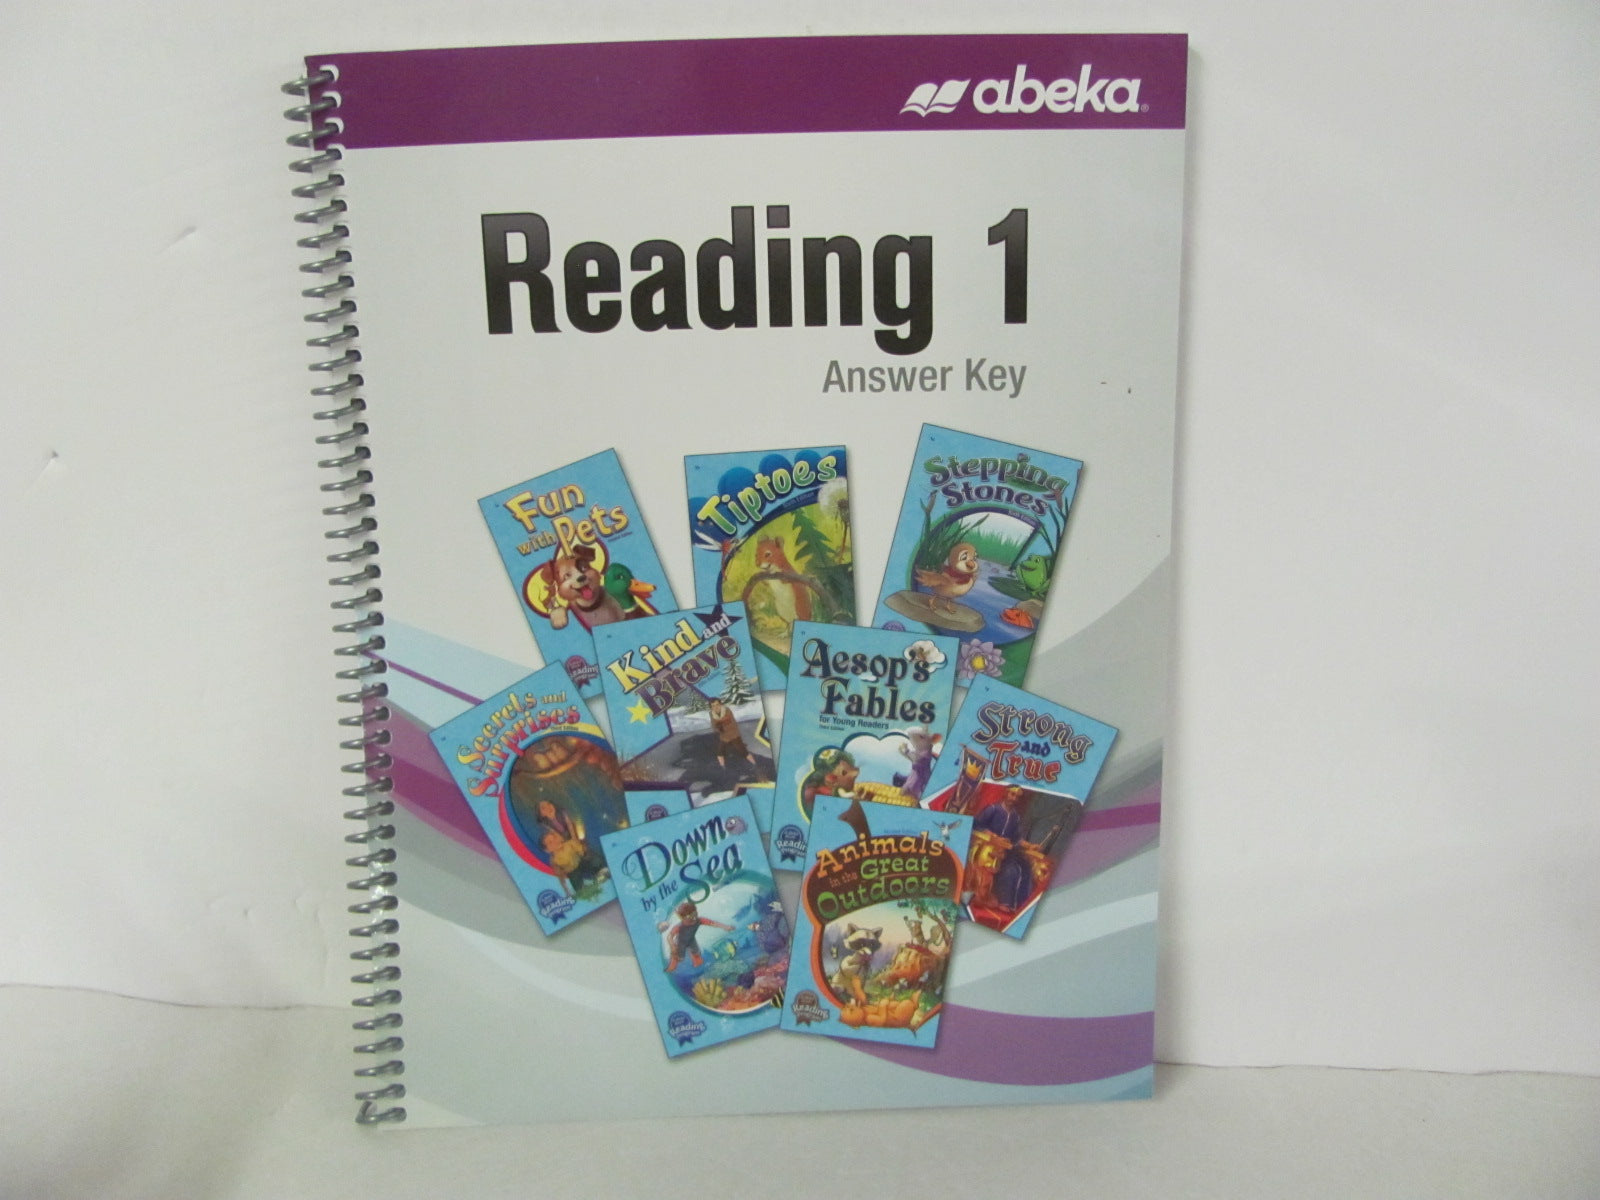 reading-1-abeka-answer-key-pre-owned-1st-grade-reading-textbooks